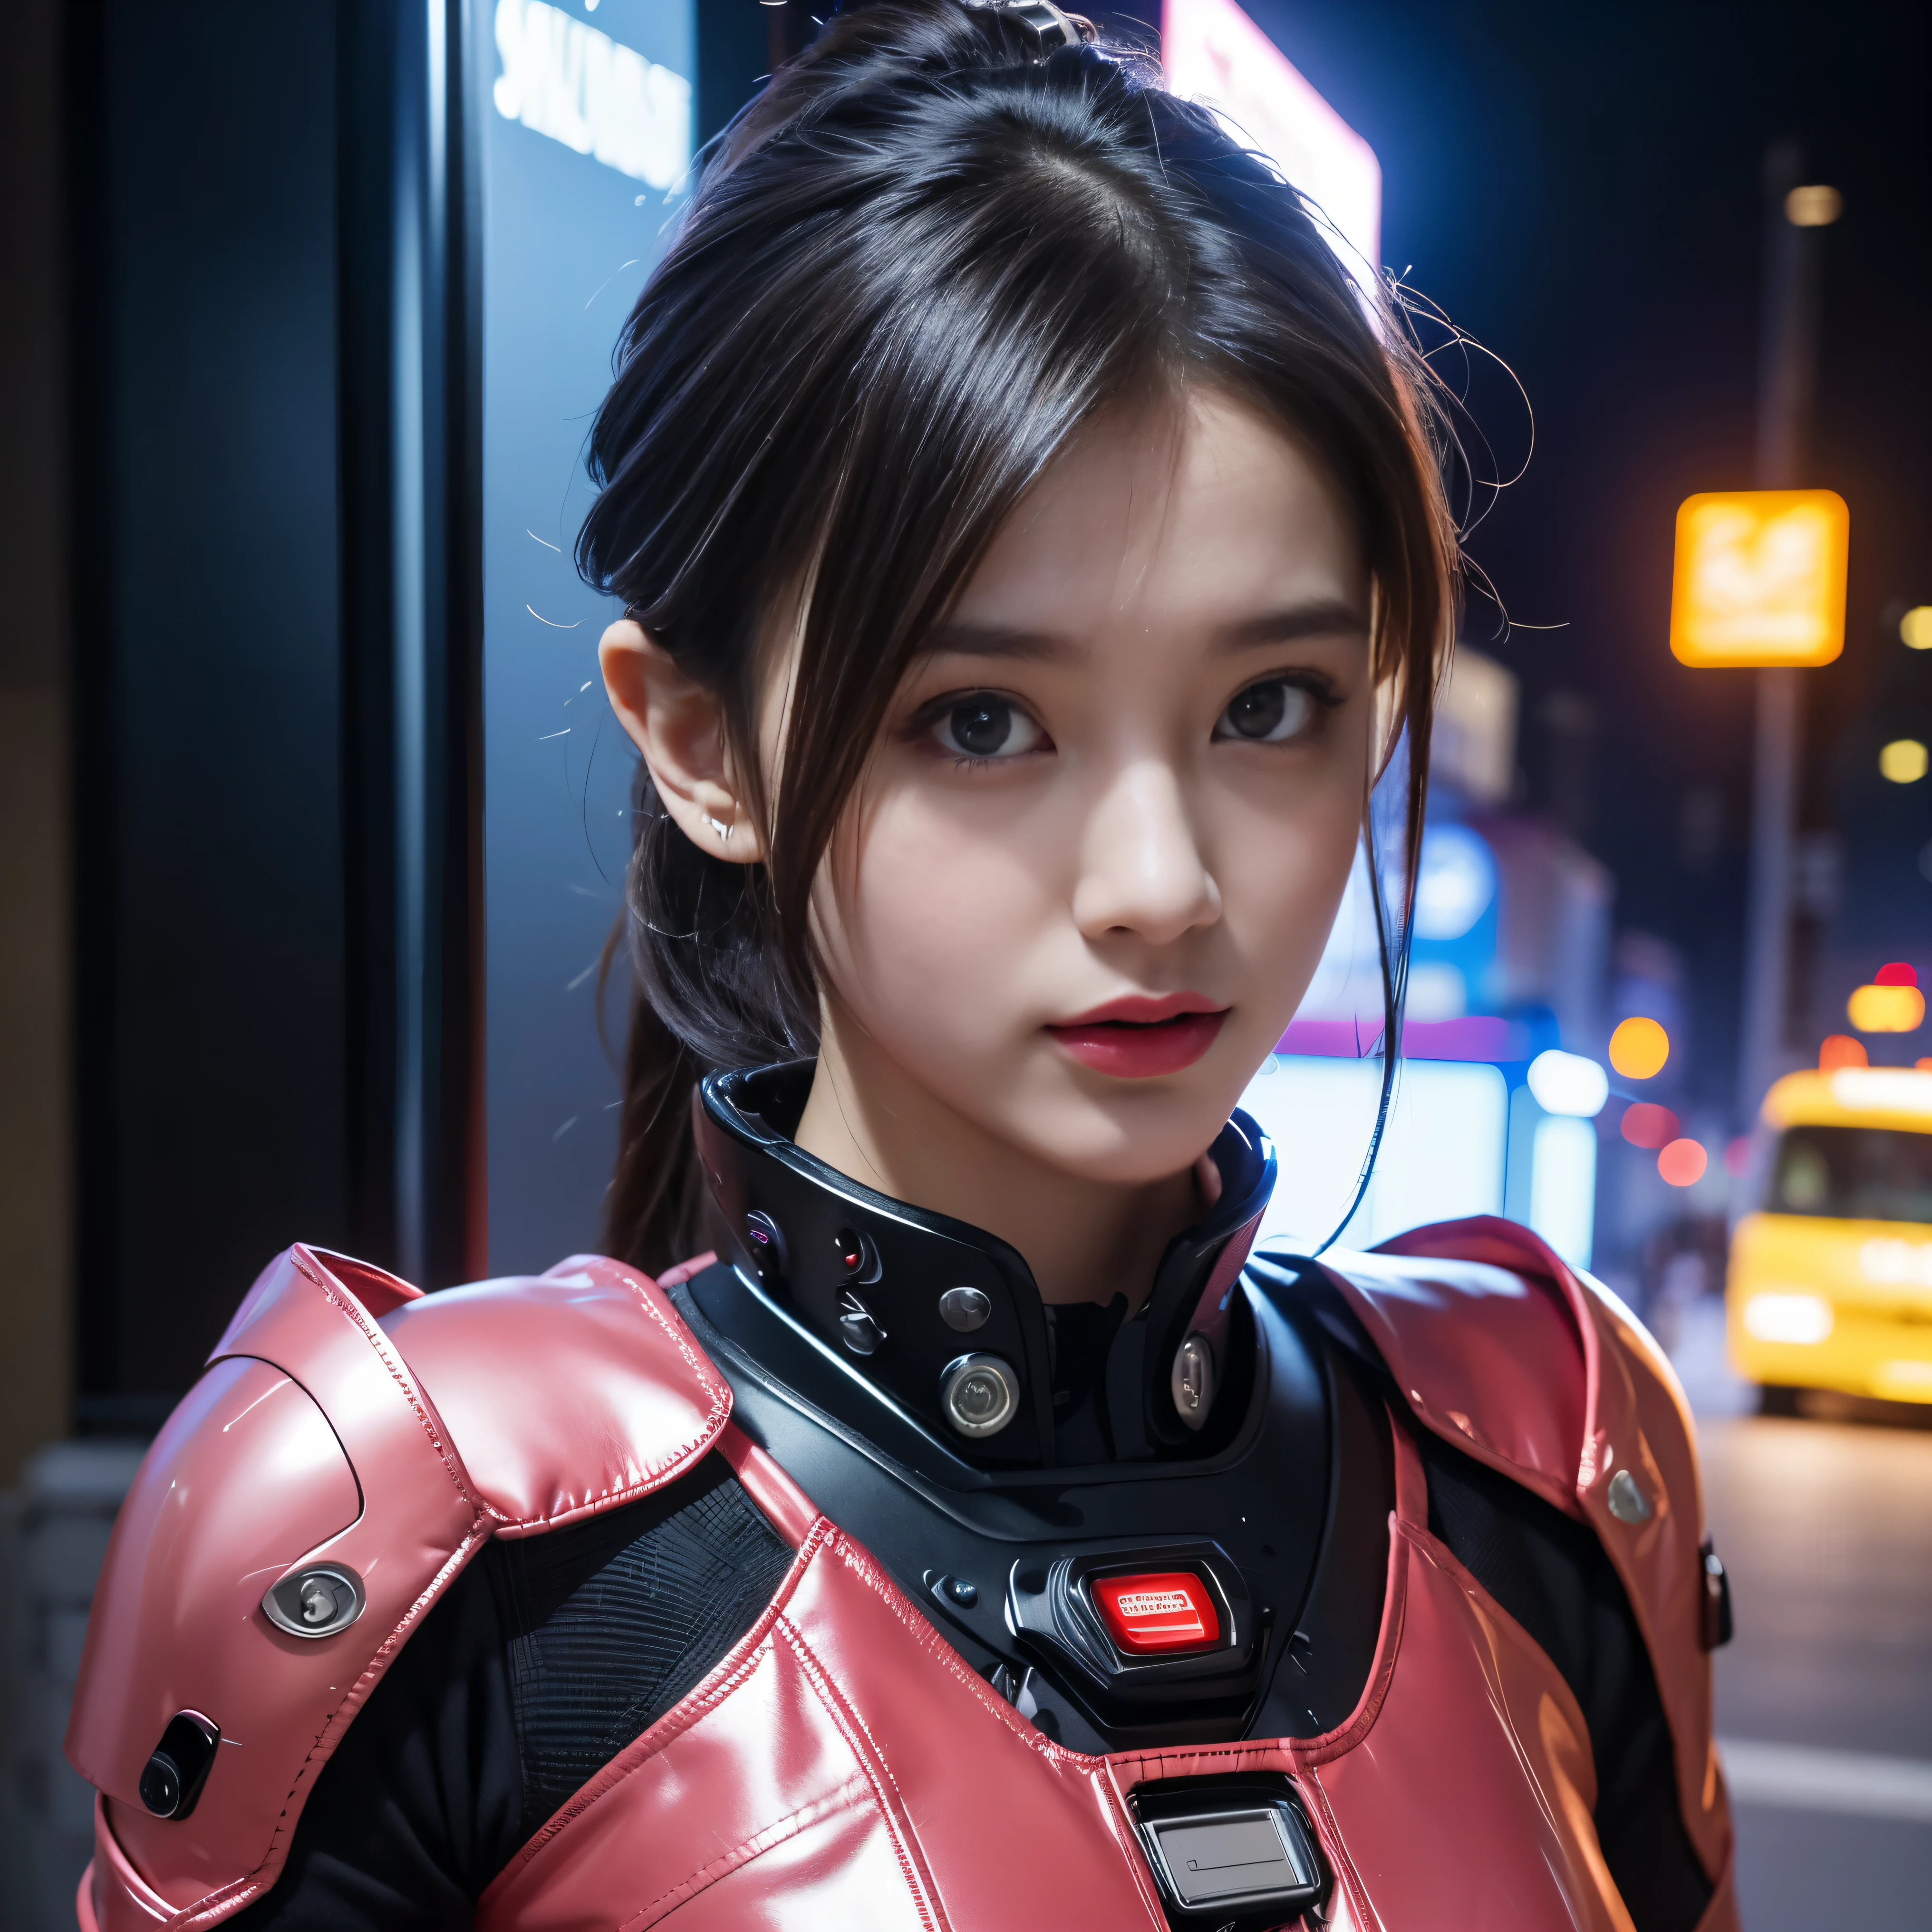 (highest quality、4k、8k、High resolution、masterpiece: 1.2)、Super detailed、(real、photorealistic、photorealistic: 1.37)、SF、beautiful young woman、bounty hunter、Cybernetic Weapons、cyberspace、High Tech City、Shining neon lights、((futuristic fashion))、((Skin-tight pink metallic outfit))、mythical creatures、standing split:1.7、Fast-paced、Exciting soundtrack、explosion、Advanced technology、Sharp contrast、Gritty atmosphere、Black Market Trading、Skyline at night、Steampunk elements、Laser gun combat、Hidden Alley、hovering drone、Enhanced Vision、The unforgiving metropolis、Cybernetic Implants、Secret organizationysterious Informant、High Speed Chase、Impressive acrobatics、Colorful holograms、Urban Exploration、Navigating Virtual Reality、A diverse and multicultural society、Dystopian society、 Crowded city street、hall々A high-rise building、Android Companion、Illegal cybernetic modifications、A heart-pounding adrenaline rush、Heroic determination